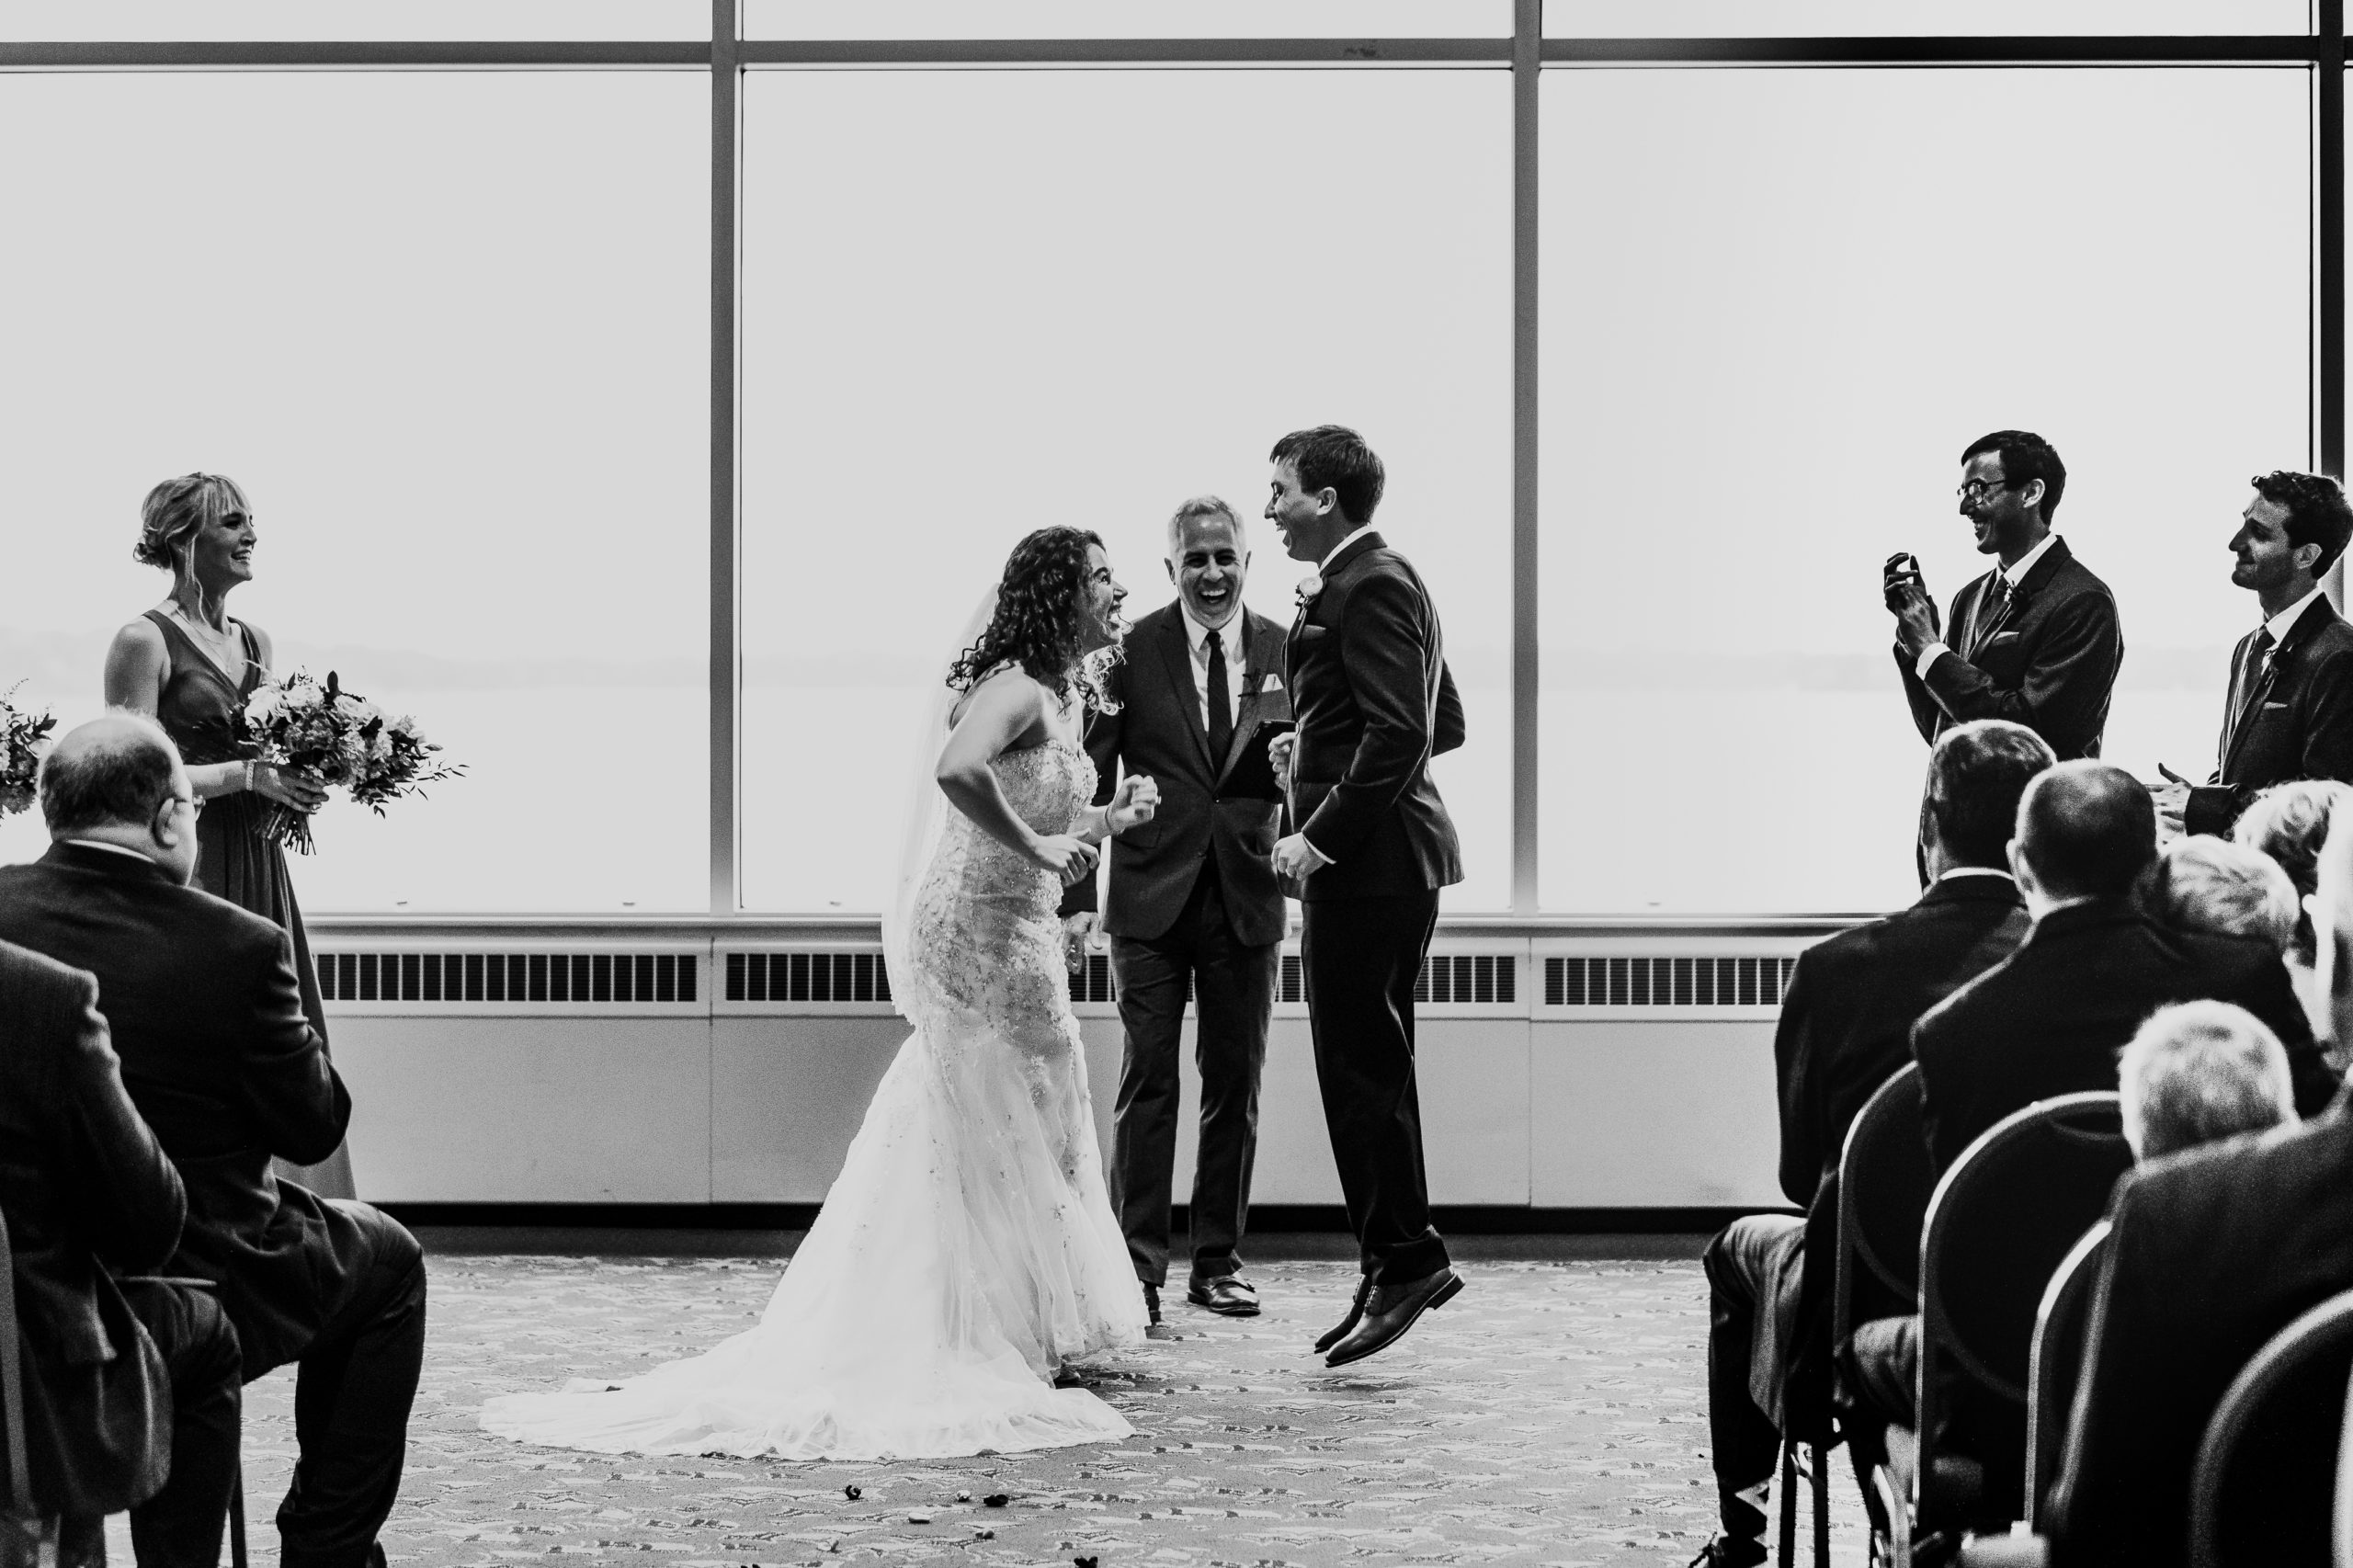 Excited wedding couple during ceremony at Monona Terrace.